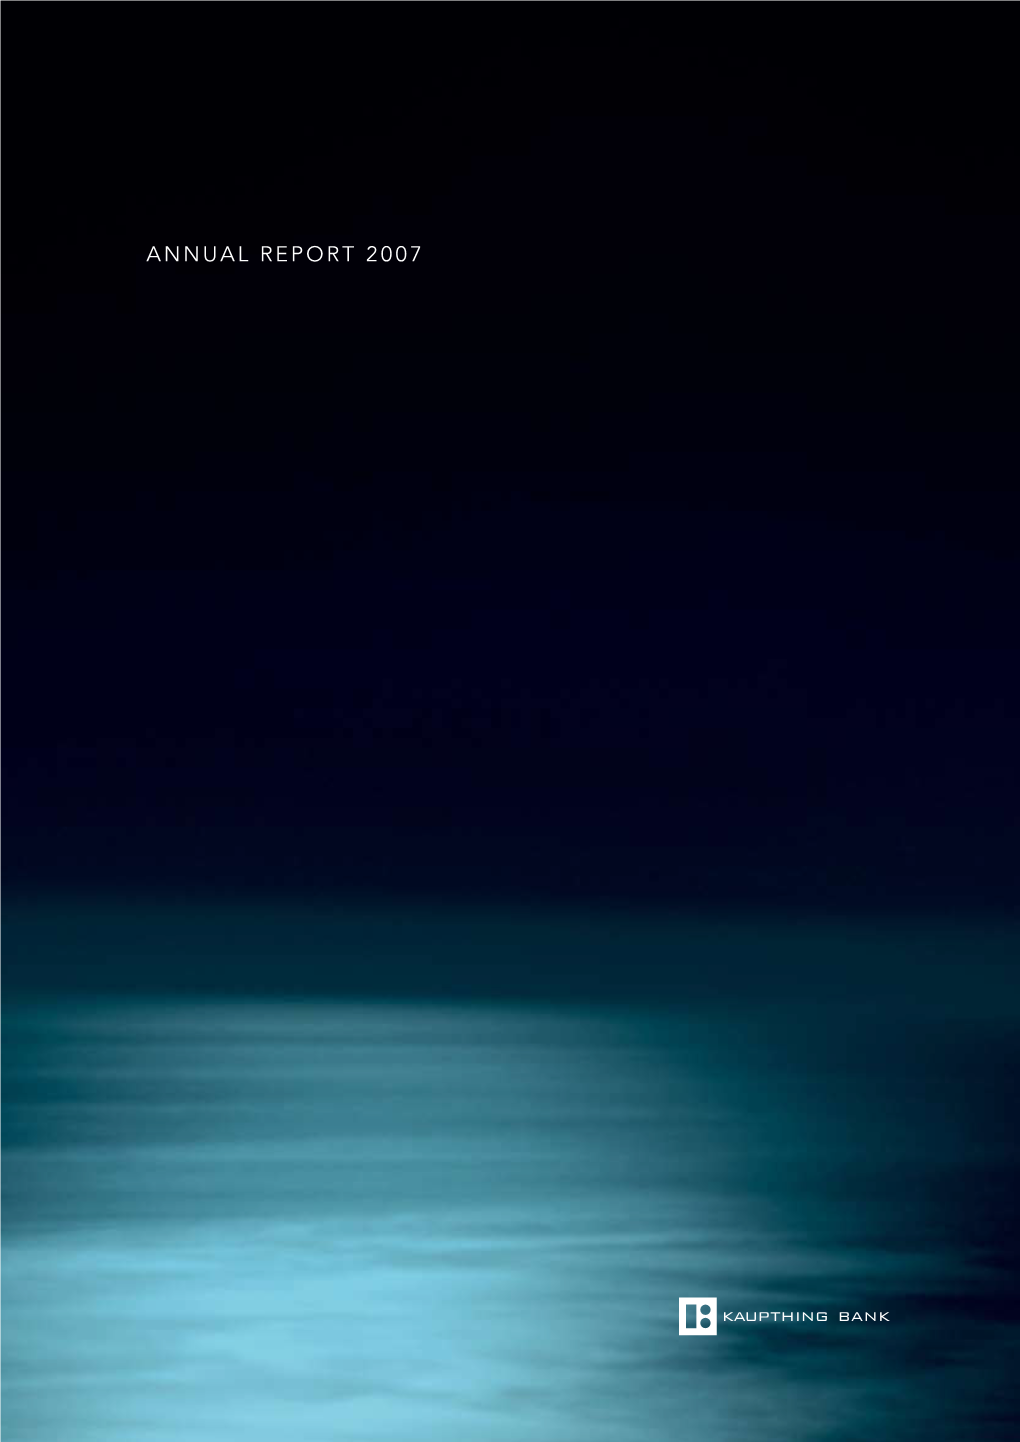 Annual Report 2007 Key Figures